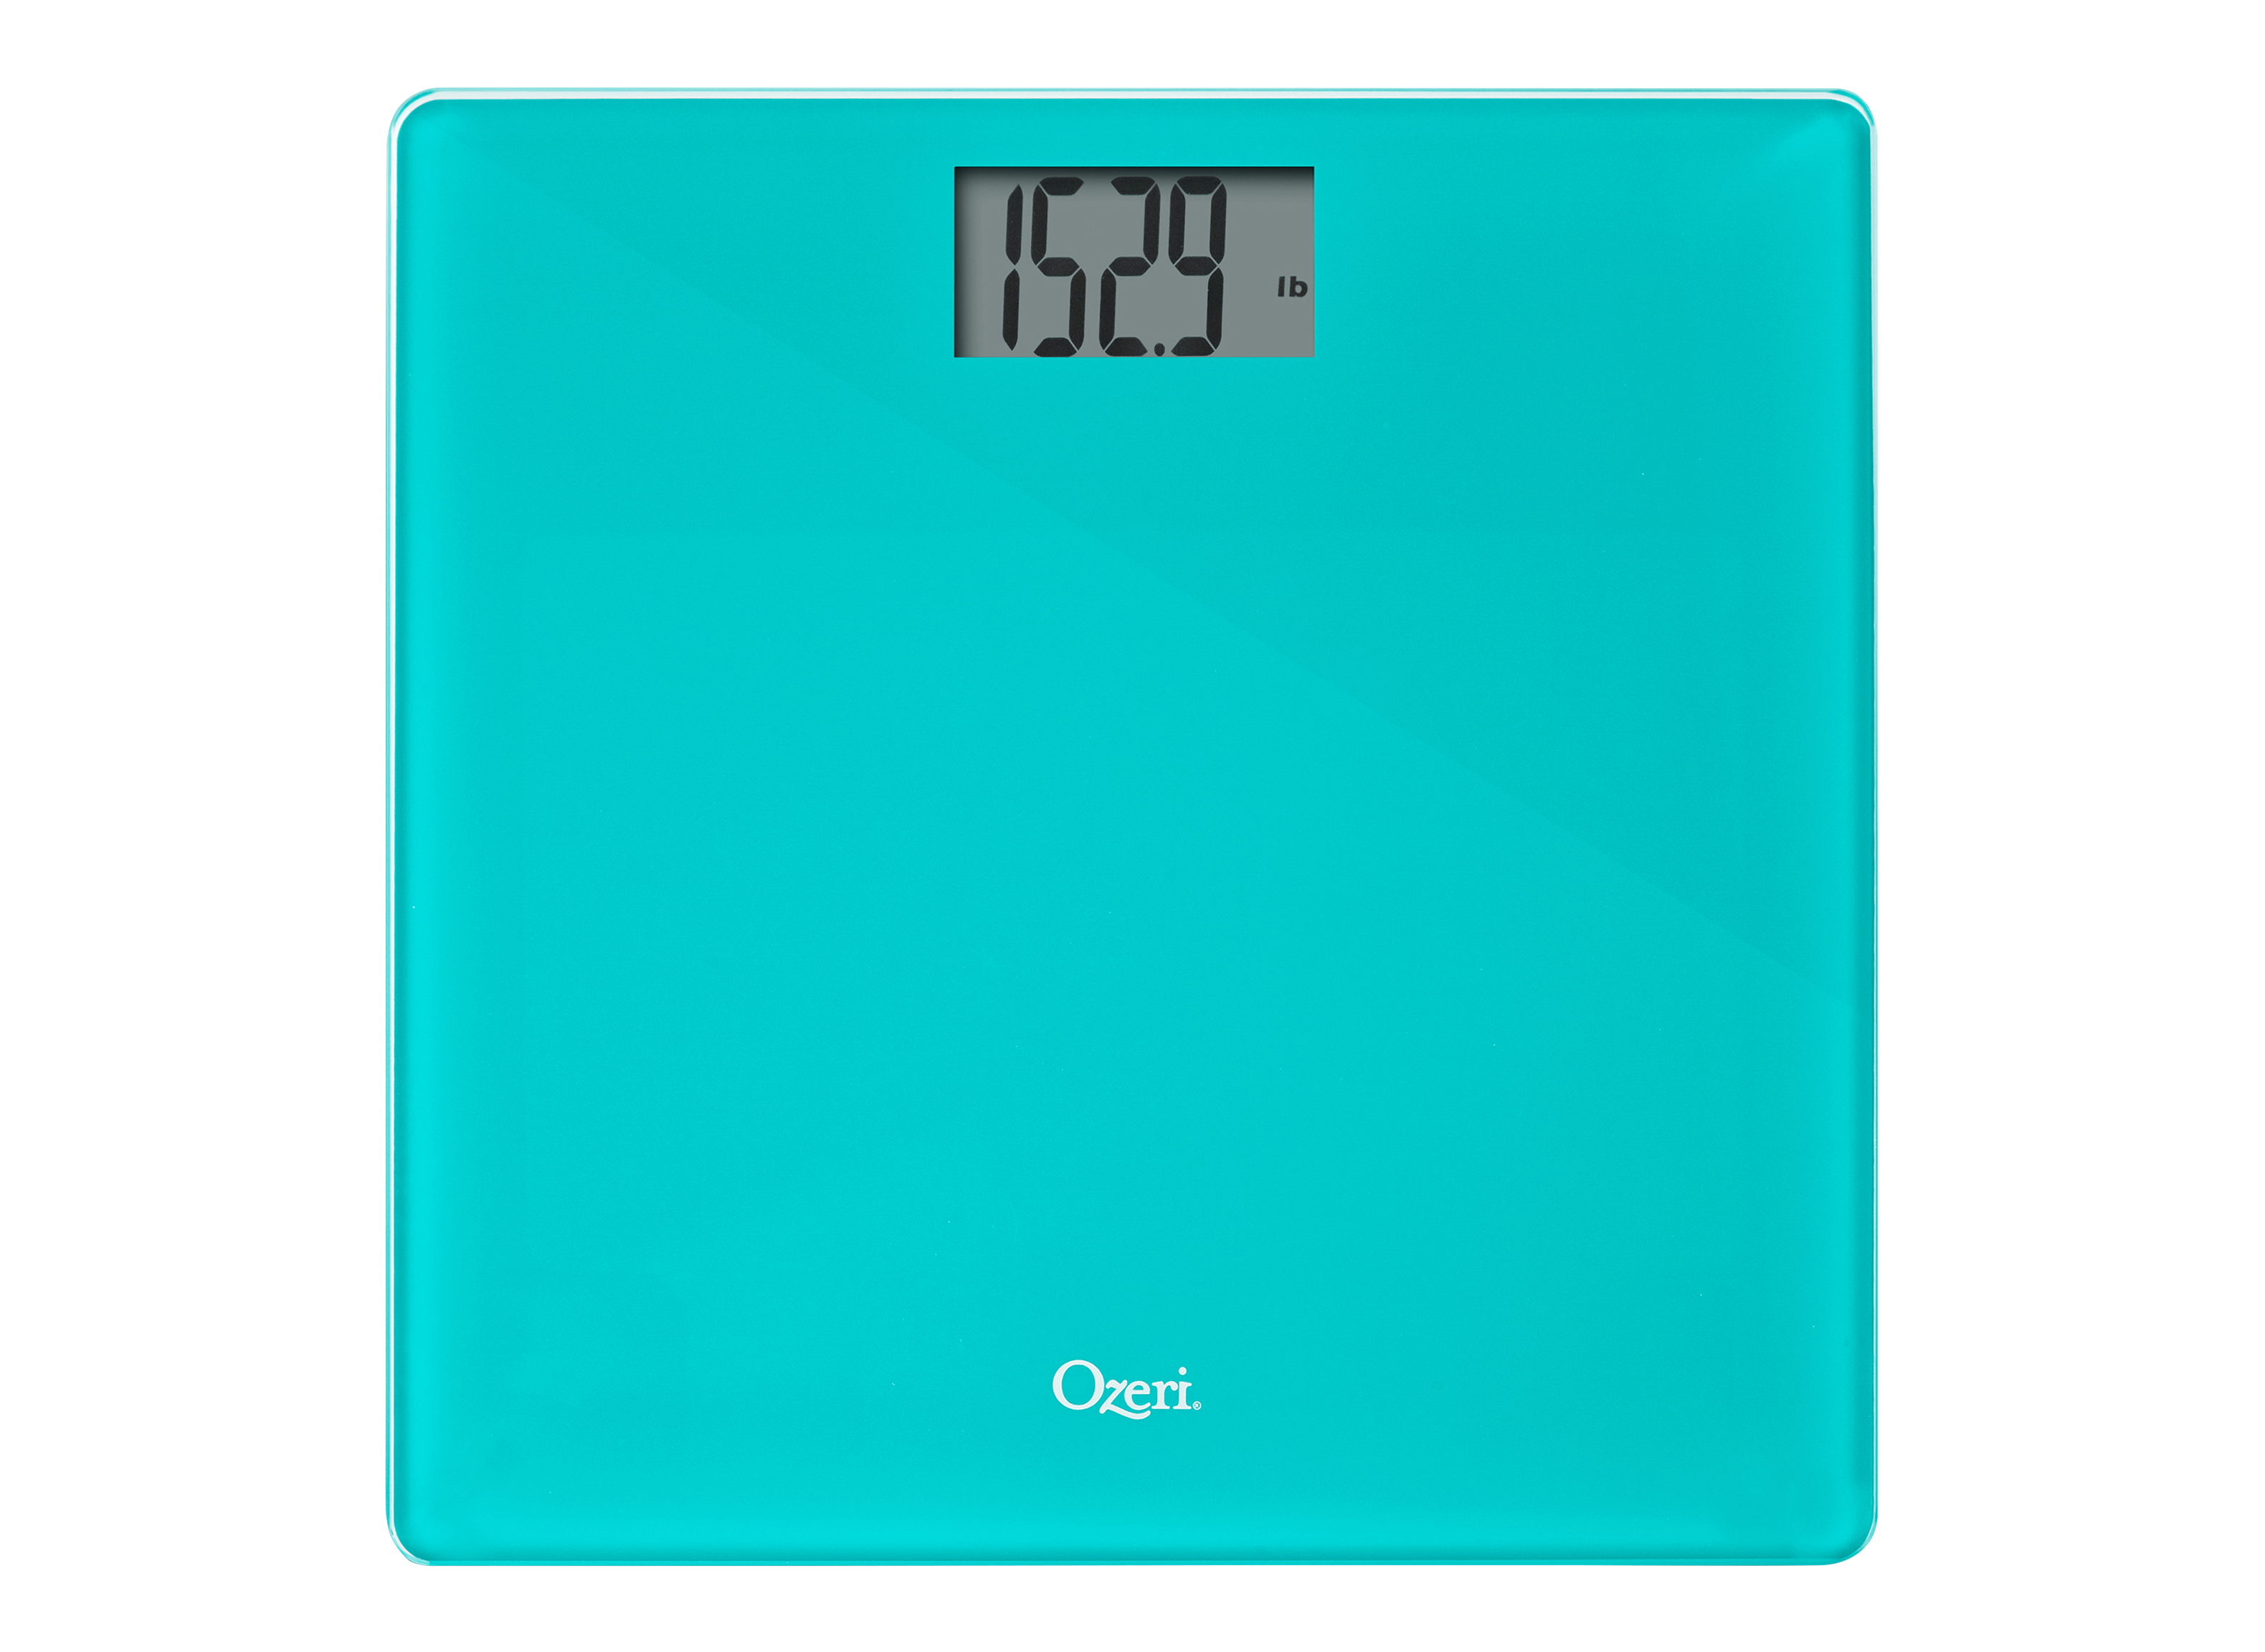 https://crdms.images.consumerreports.org/prod/products/cr/models/407541-digital-scales-ozeri-precision-zb18-10031661.png